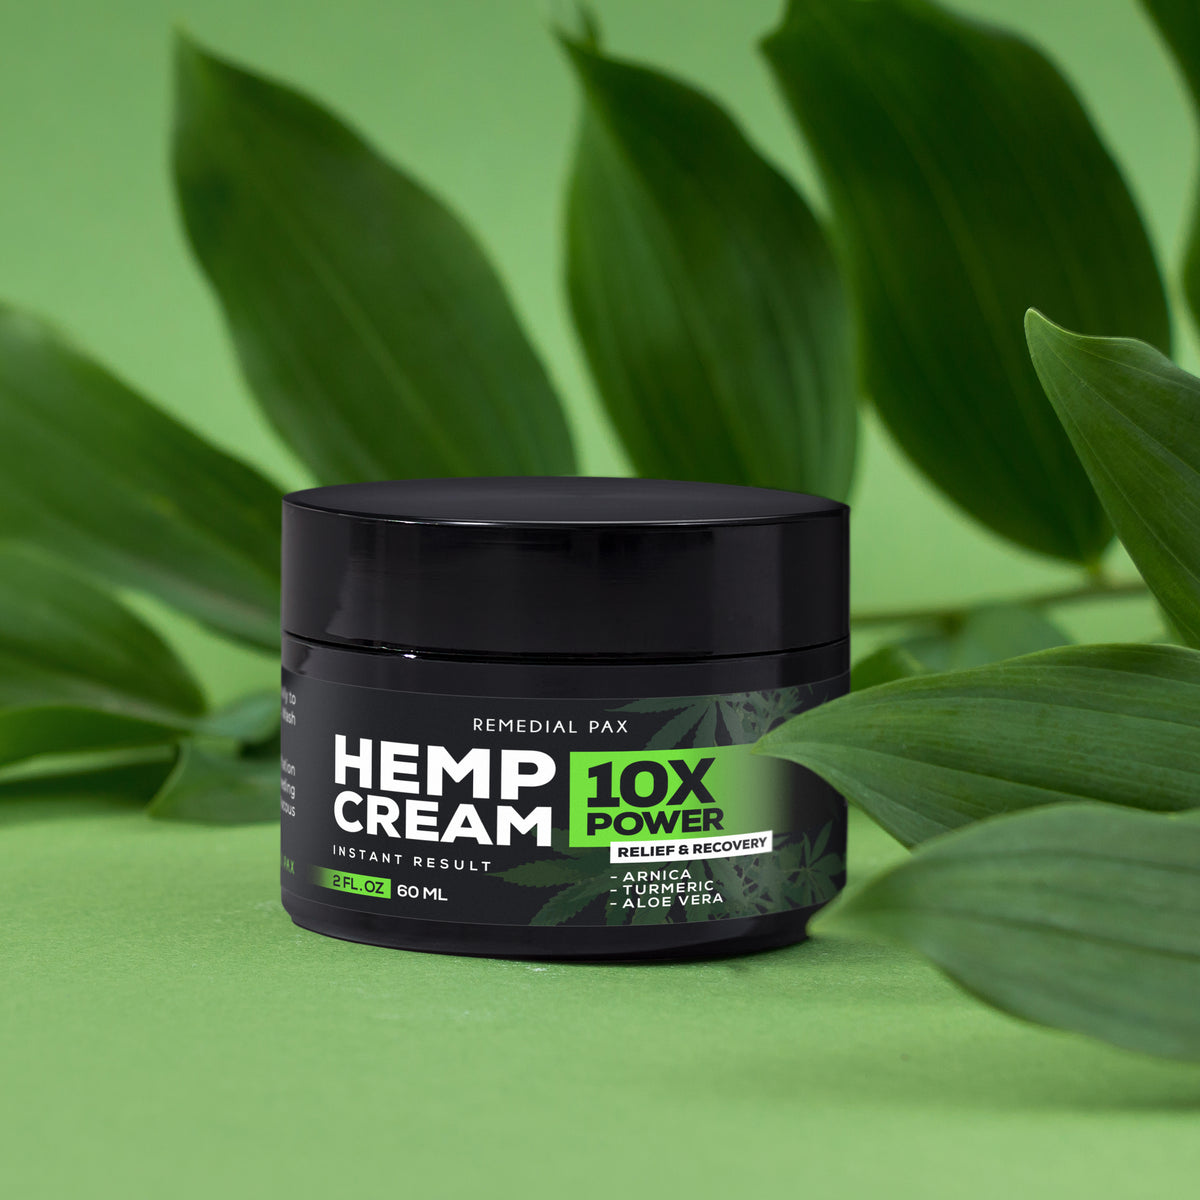 Maximum Strength Pain Relief with Instant Hemp Cream for Body, Back, Hands, Sports